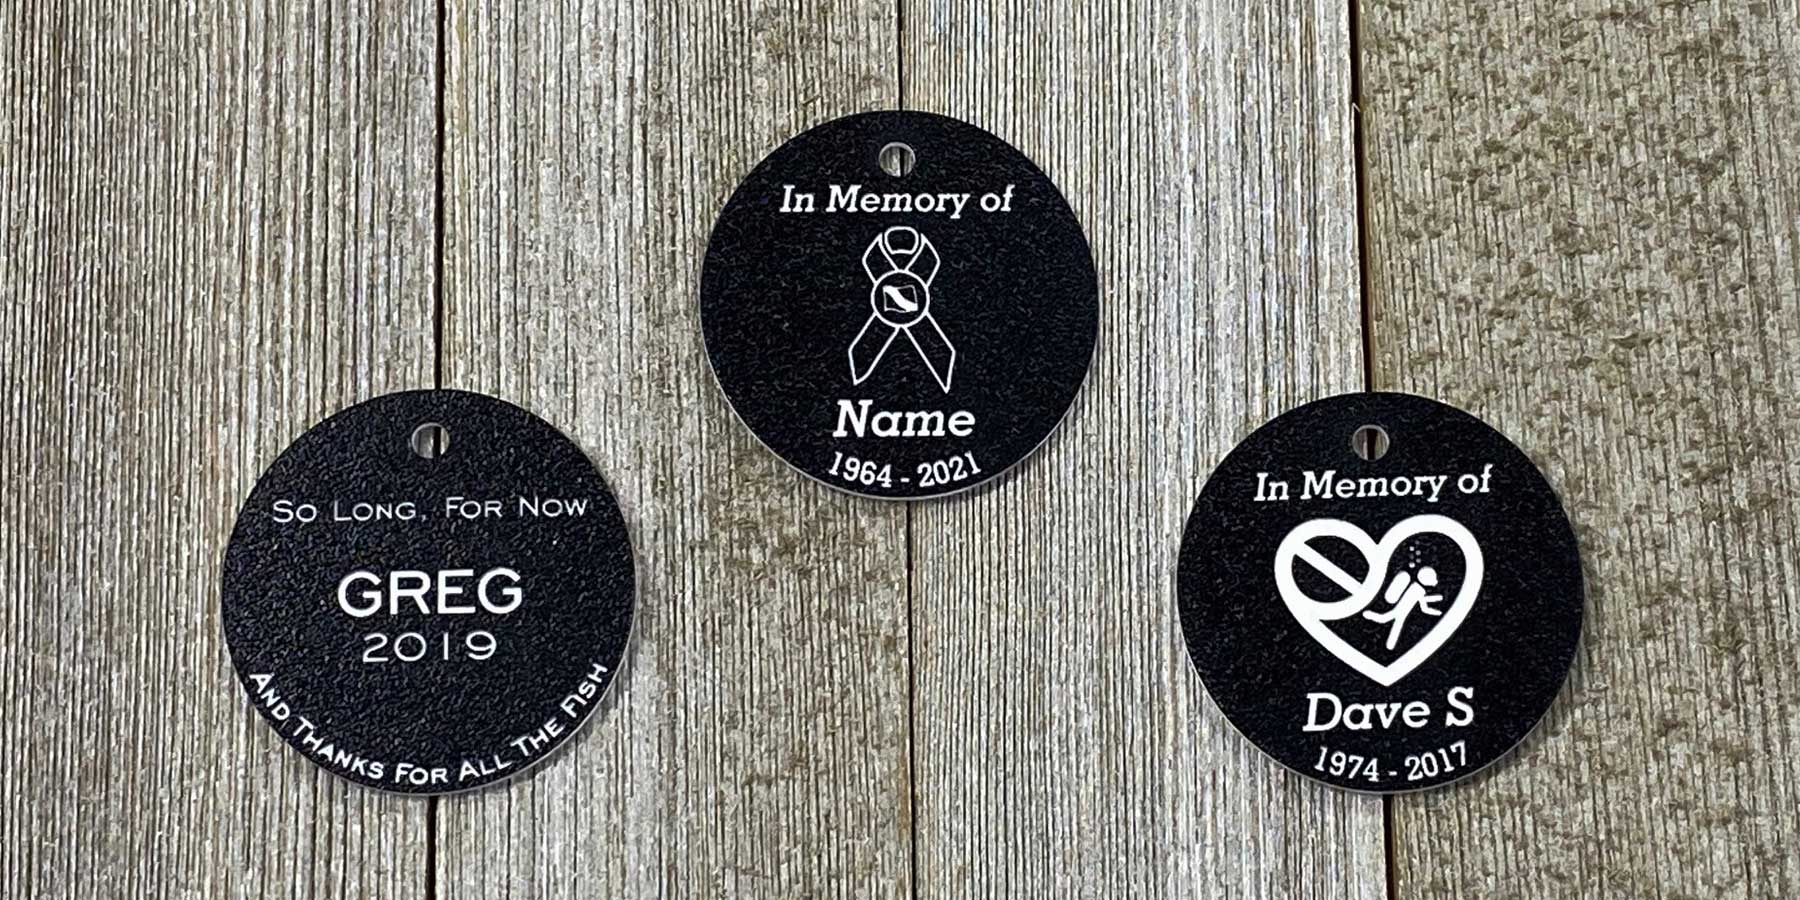 Scuba Diver Memorial Tags honoring divers who have died